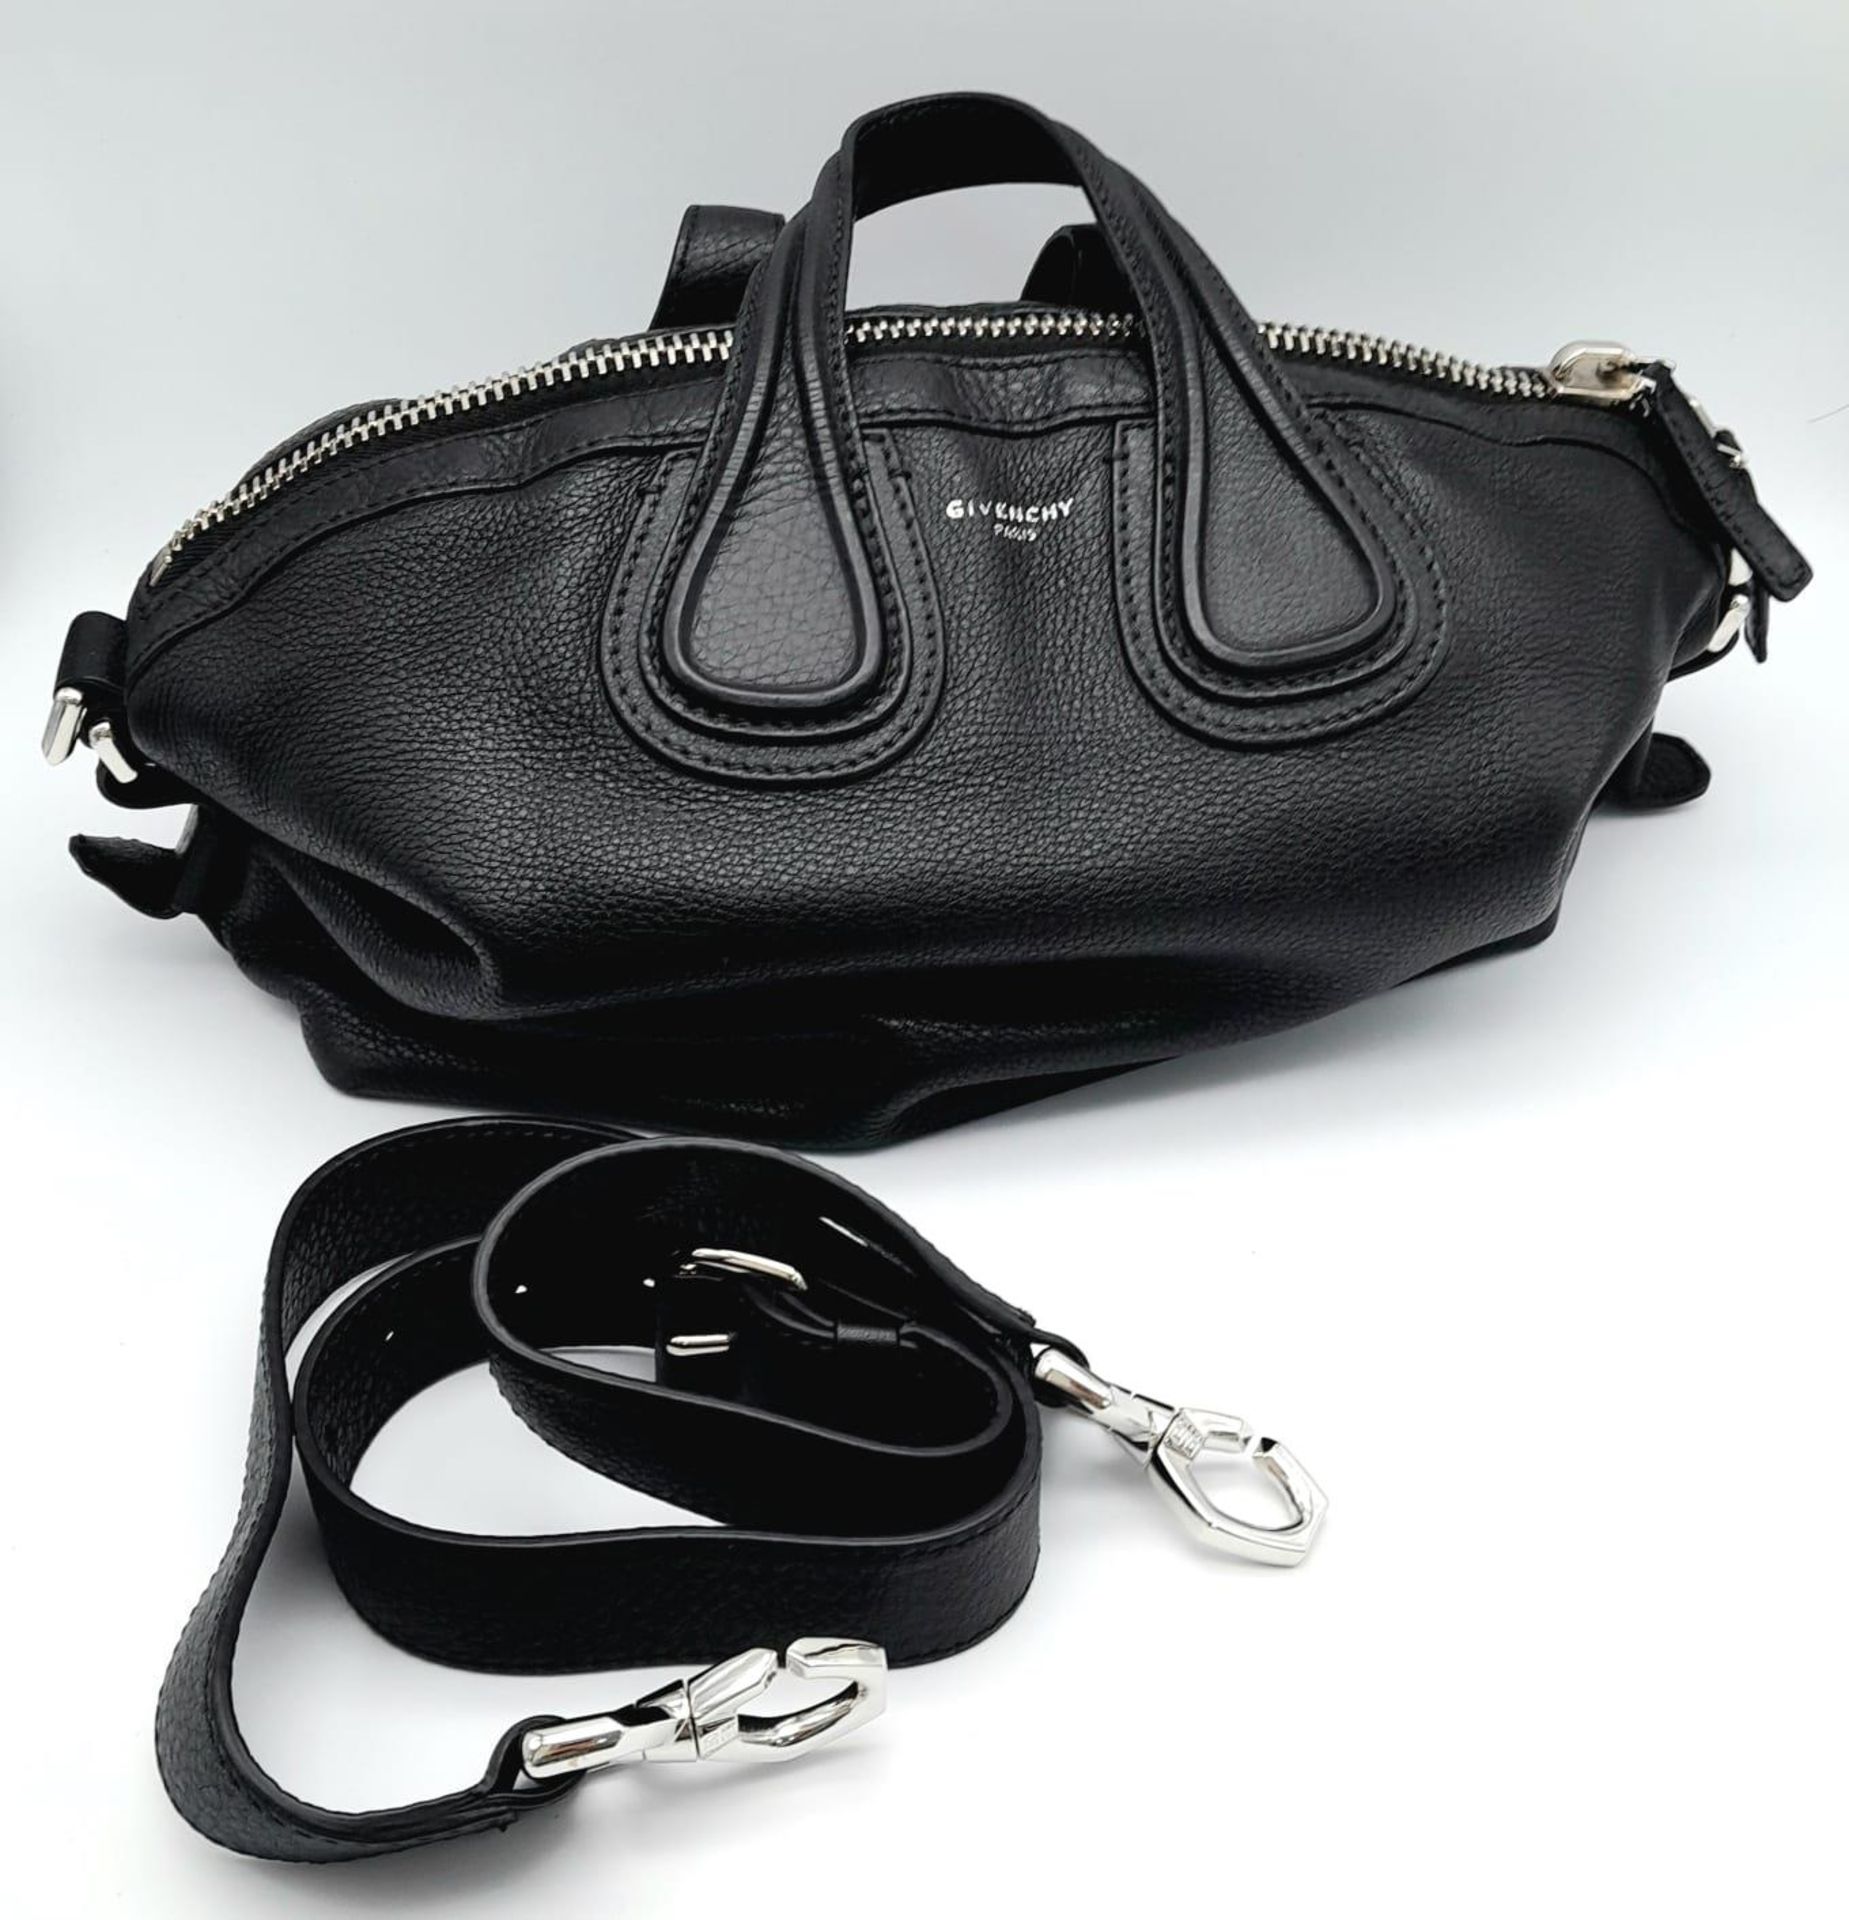 A Givenchy Black Grained Leather Nightingale Shoulder Bag. Come with a detachable shoulder strap. - Image 16 of 17